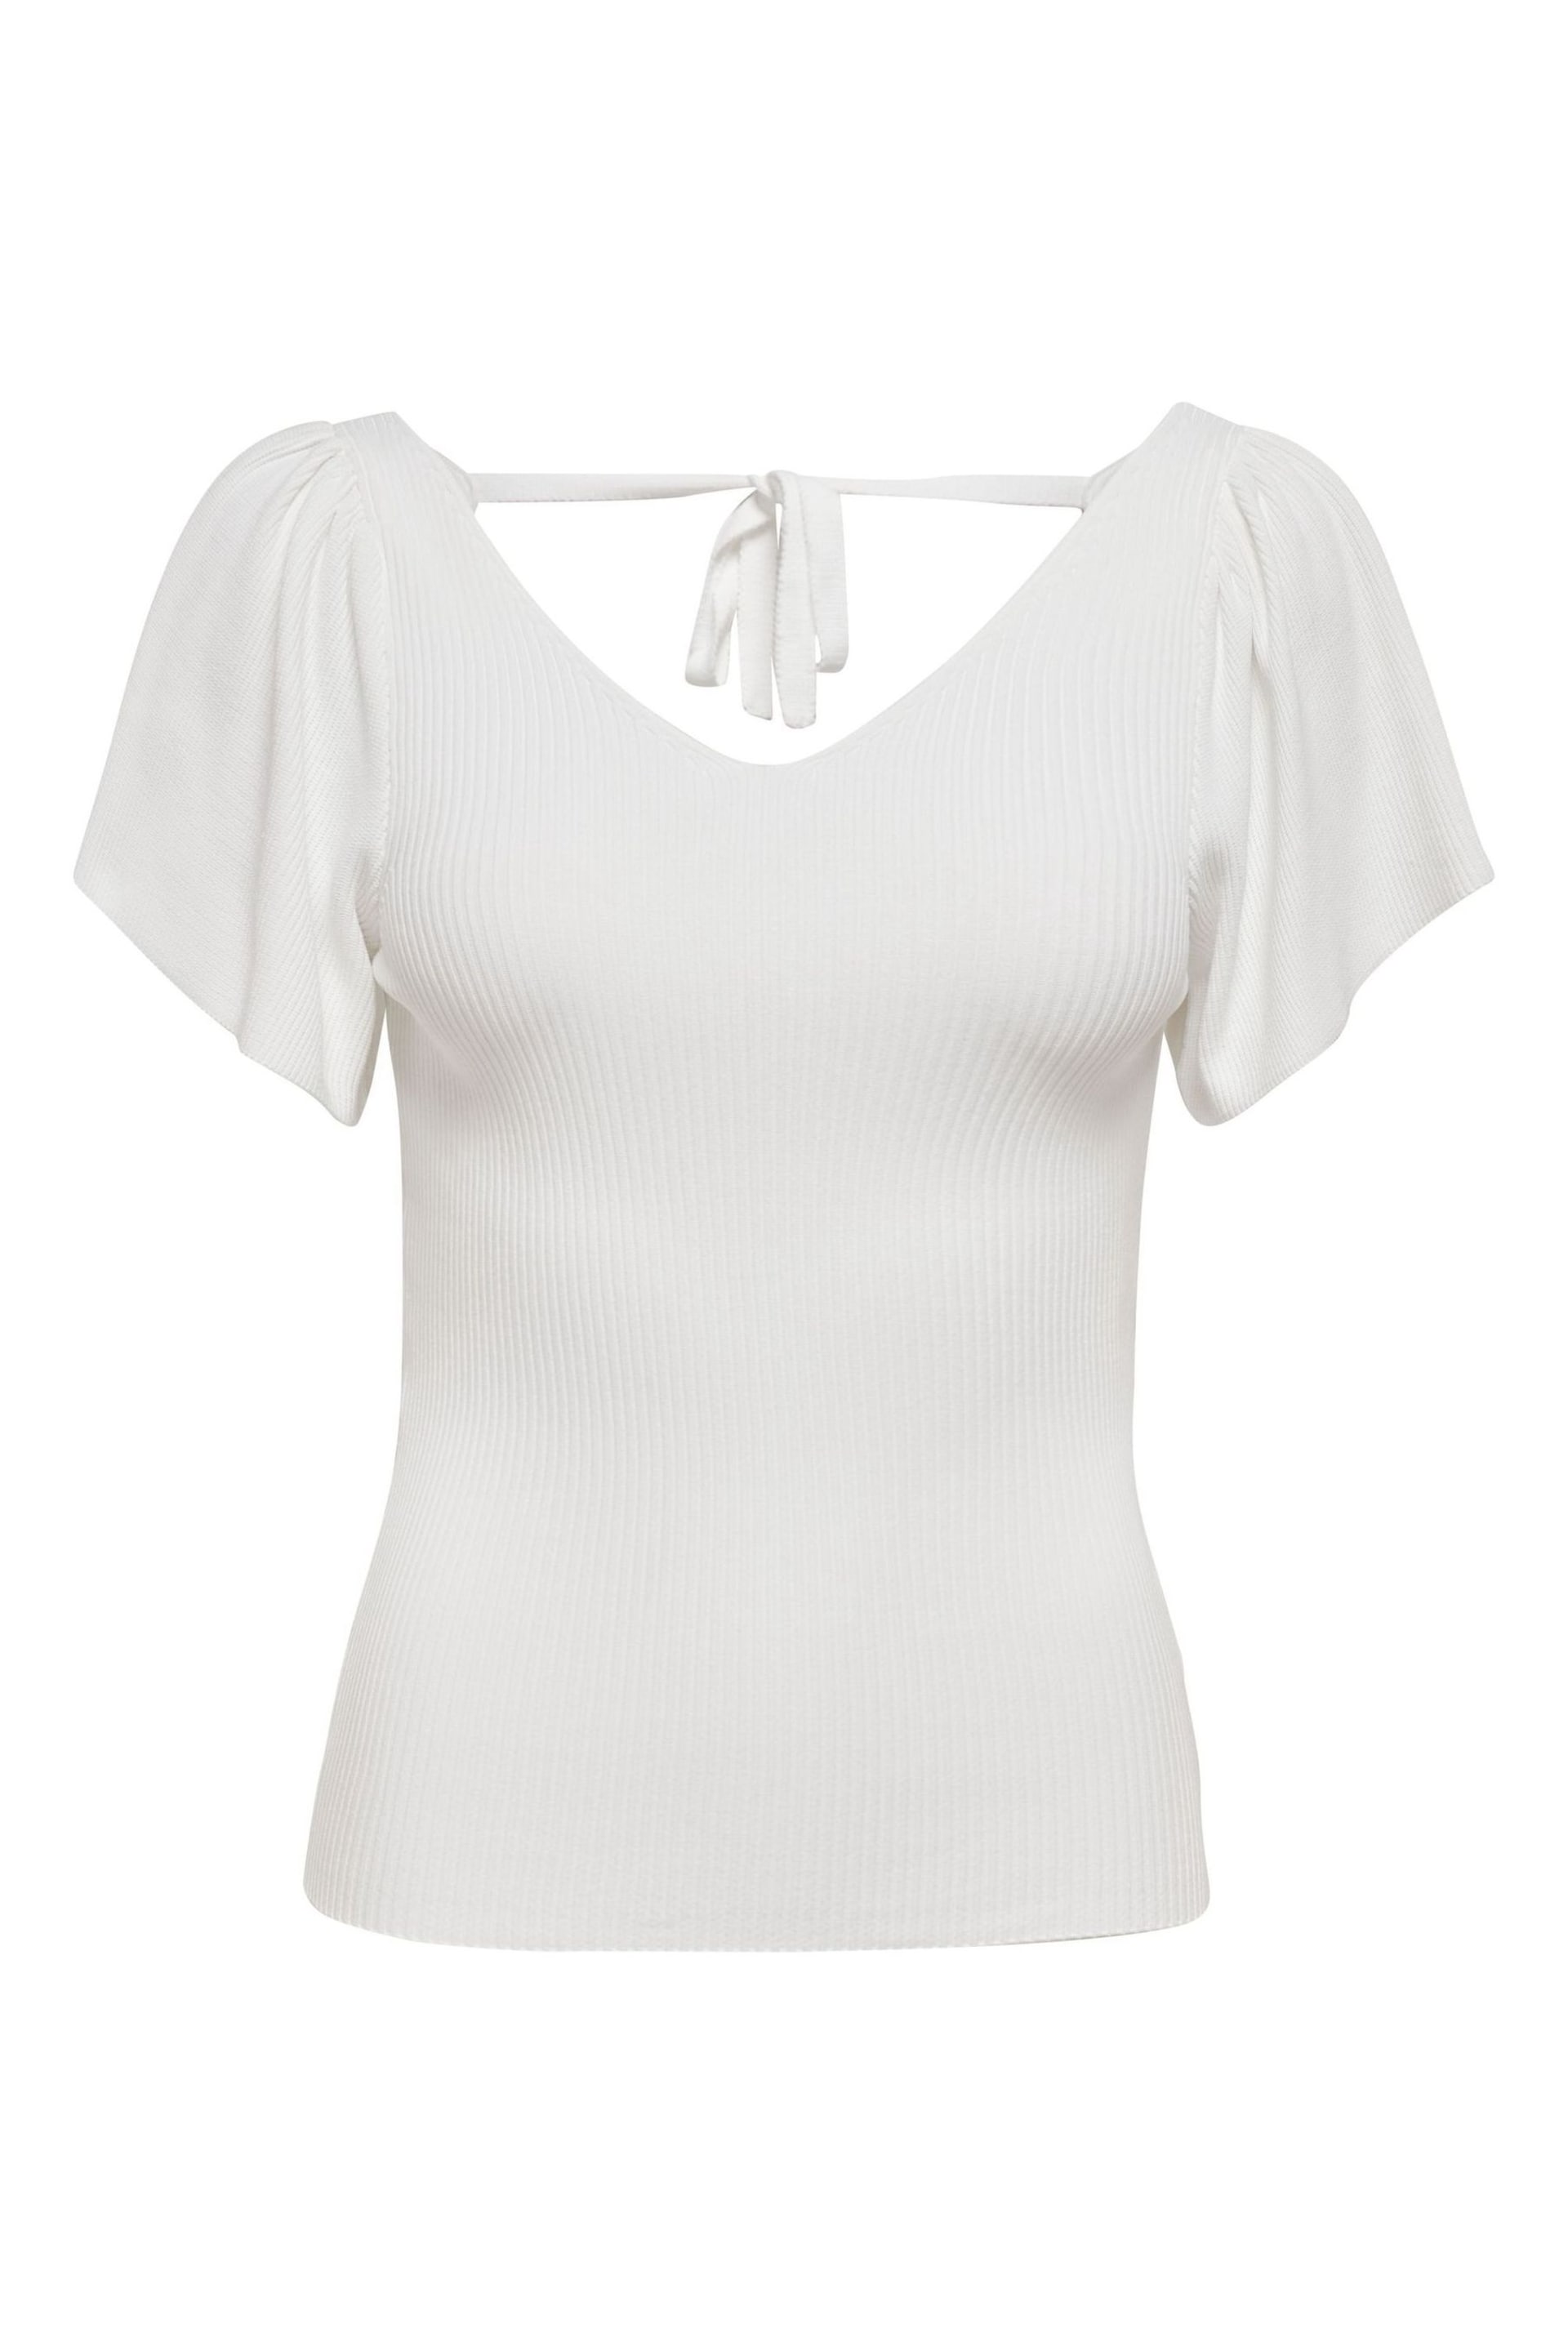 ONLY White Frill Sleeve Top - Image 5 of 5